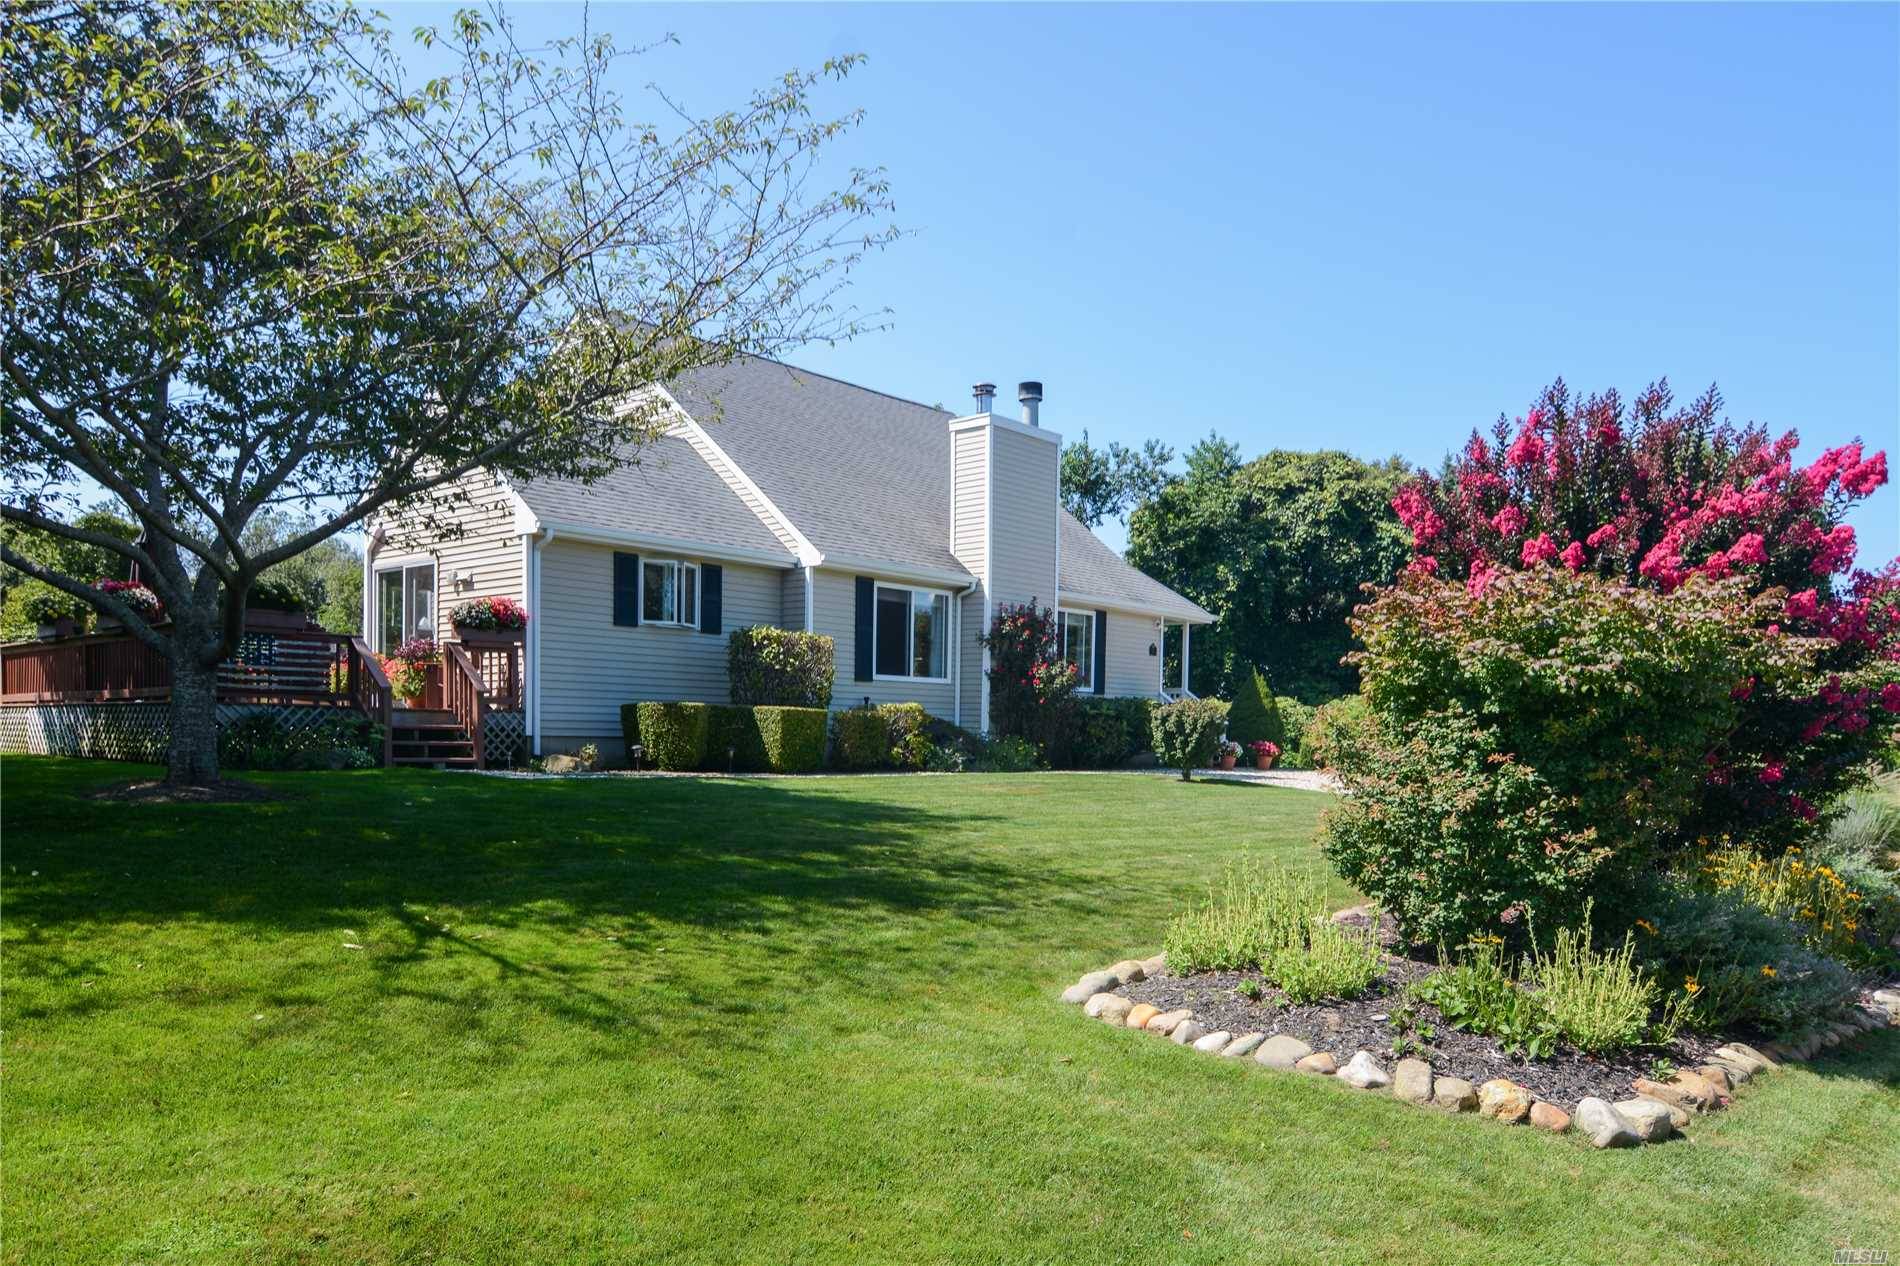 Tucked Away On A Nice Quiet Cul De Sac Sits This Immaculate And Lovingly Cared For Four Bedroom, Two Bath Home On A Beautifully Landscaped Shy Half Acre.